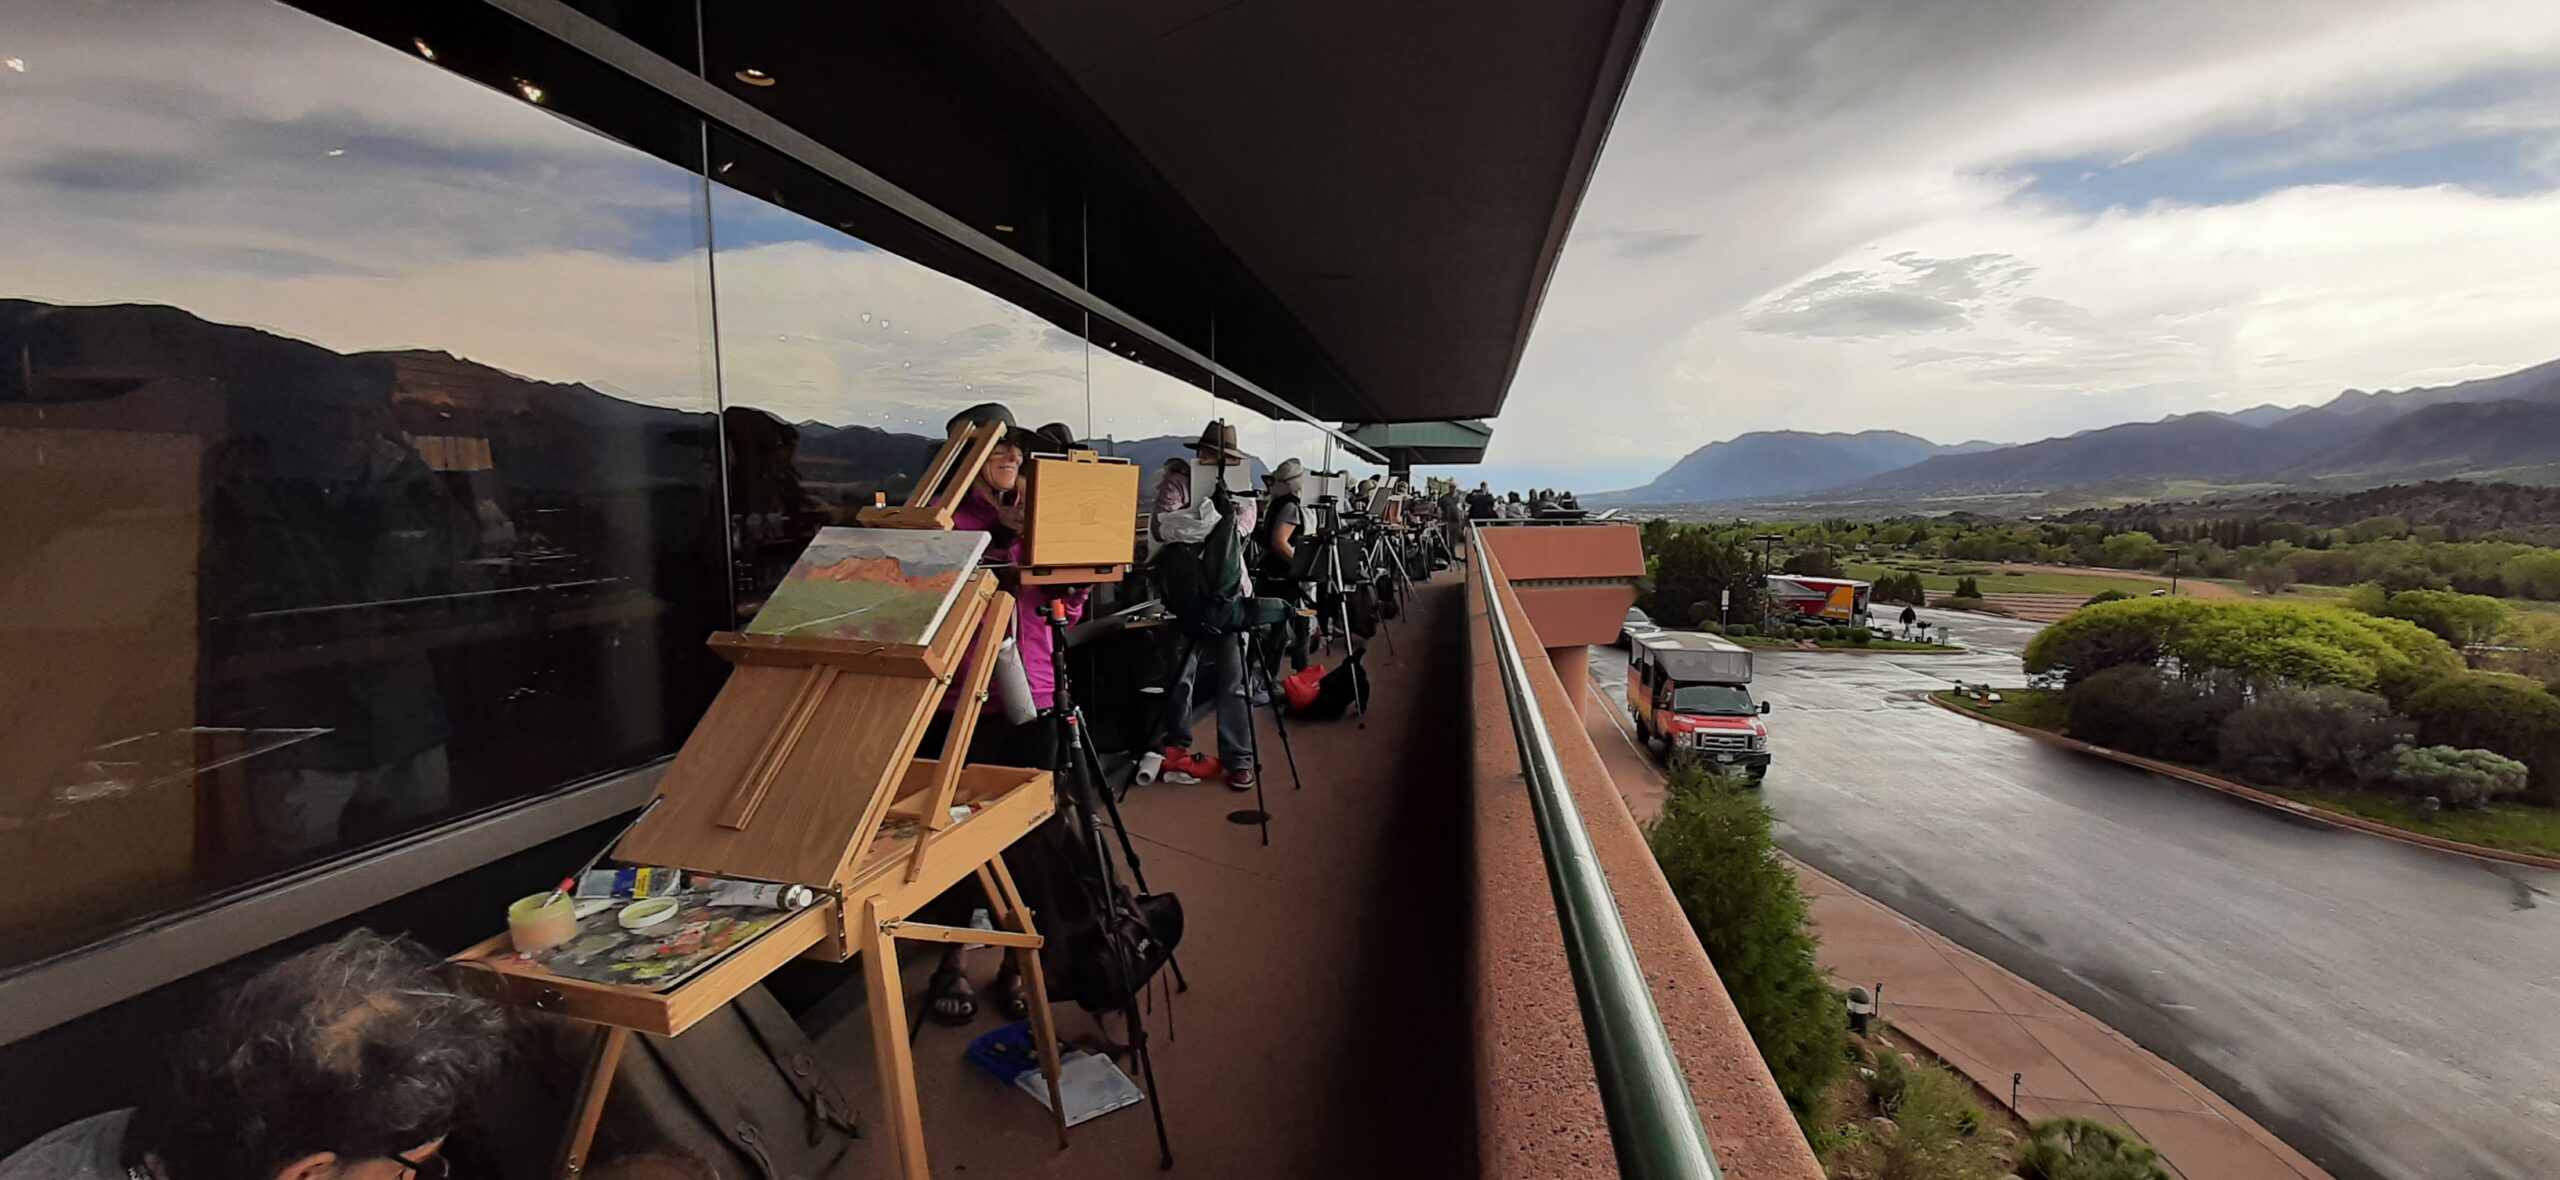 Some painters chose to work from the balcony of the Visitors Center, which offered a spectacular view.